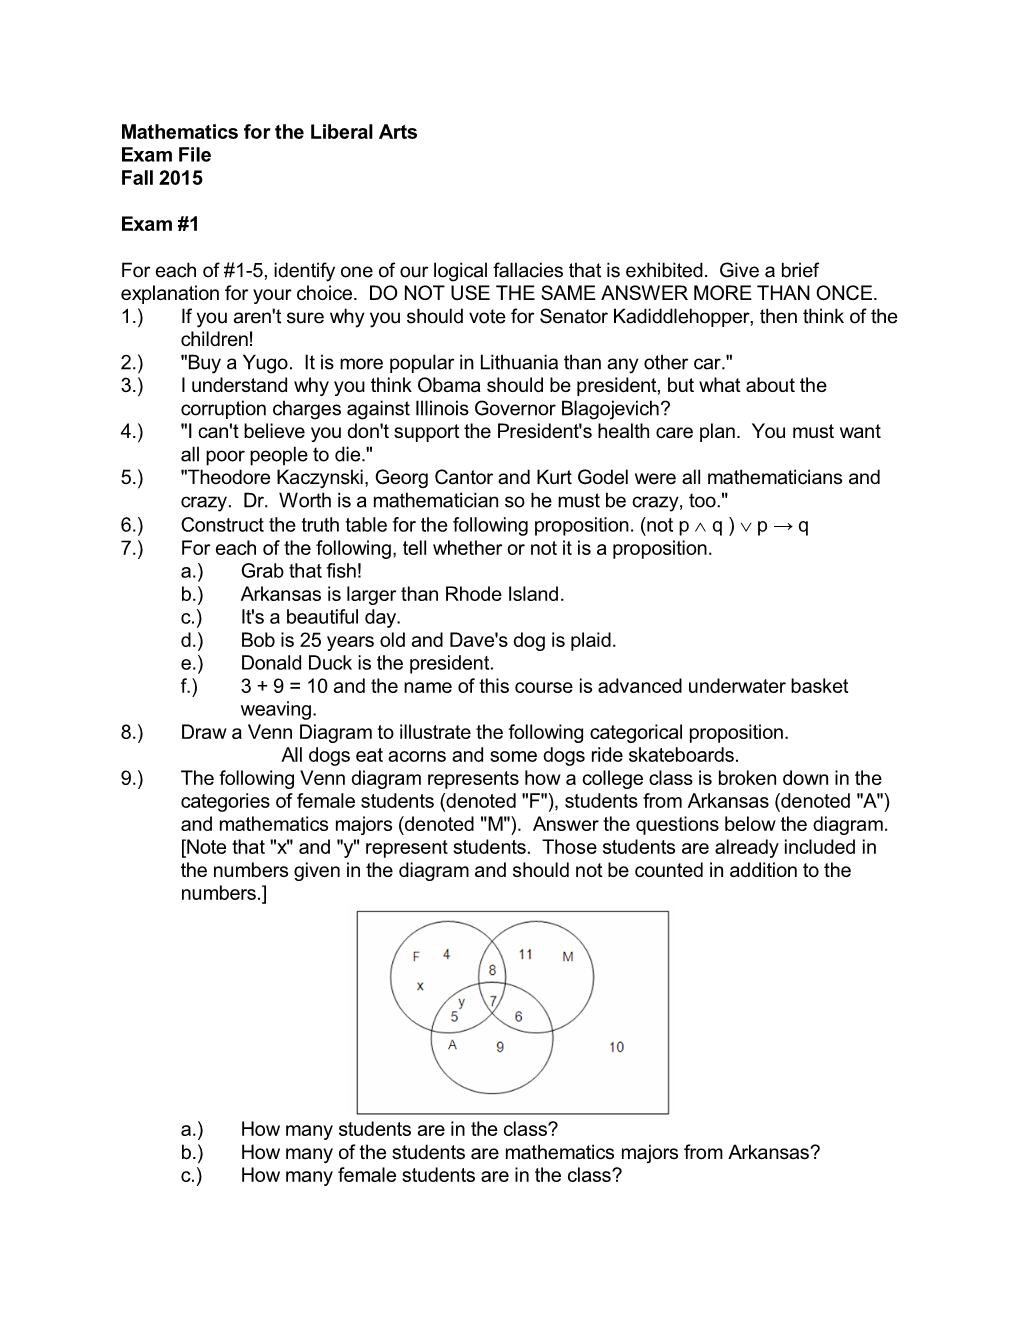 Mathematics for the Liberal Arts Exam File Fall 2015 Exam #1 for Each Of